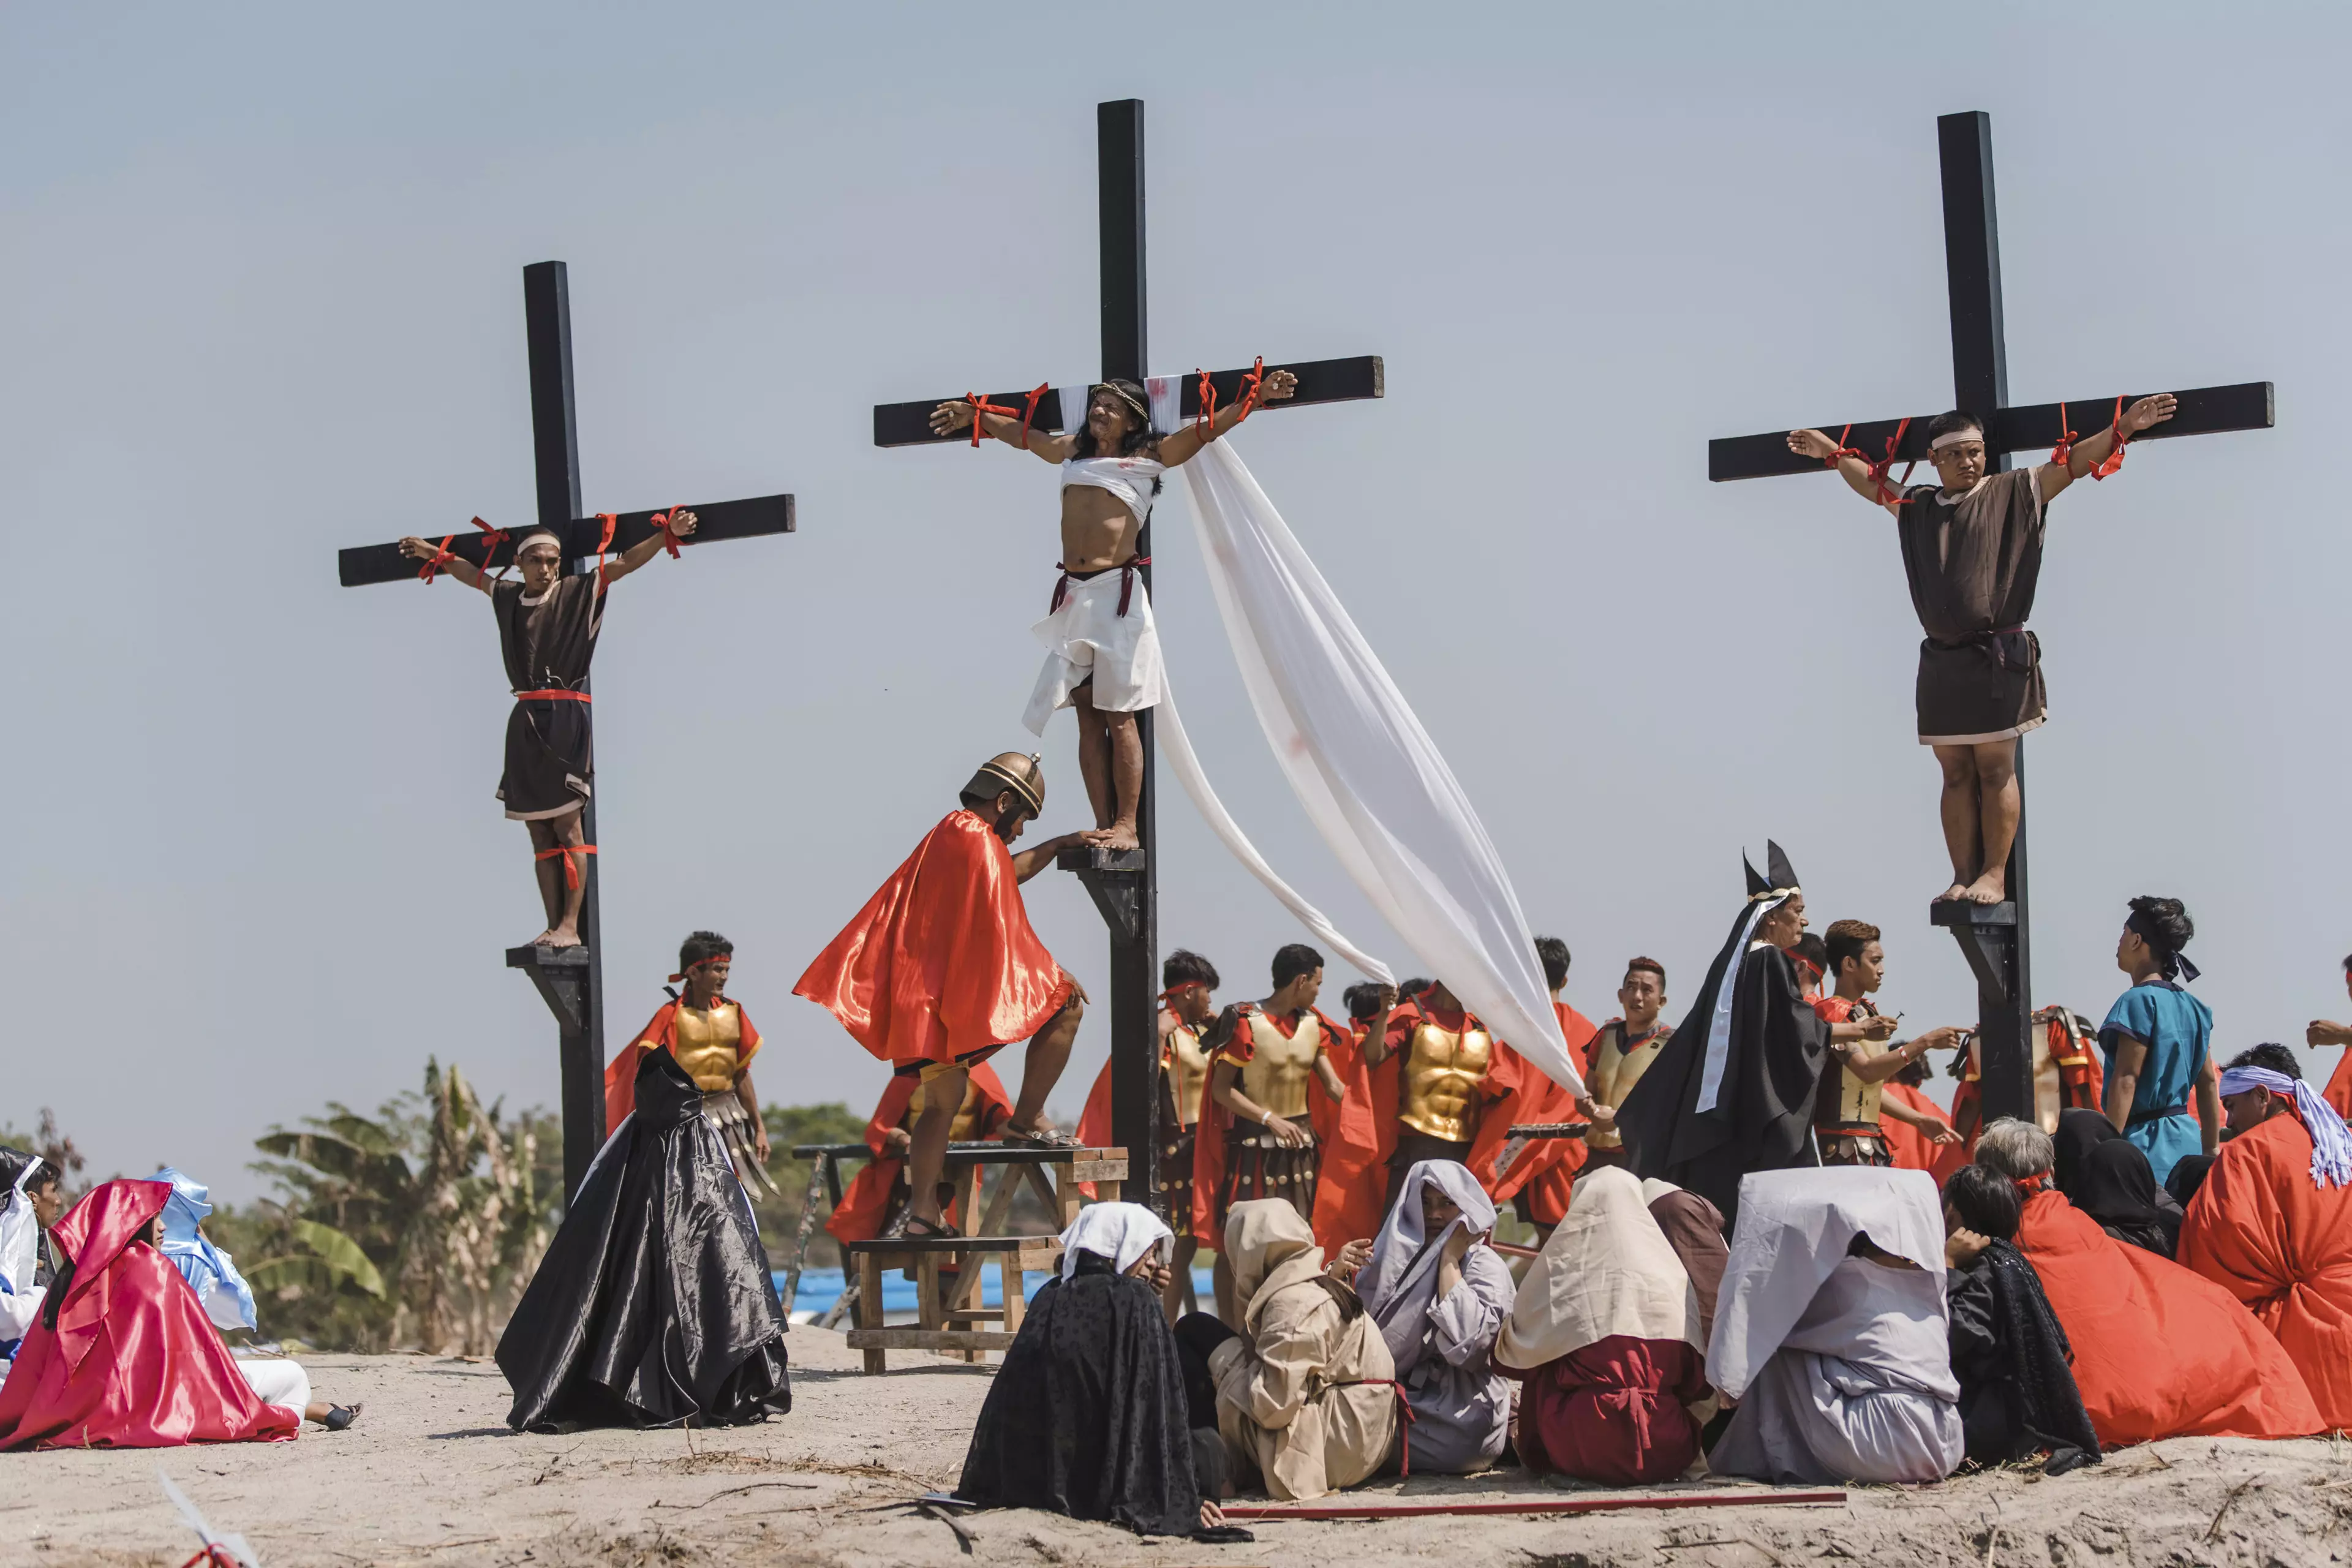 Ruben Enaje, was 'crucified' for the 33rd year in a row.